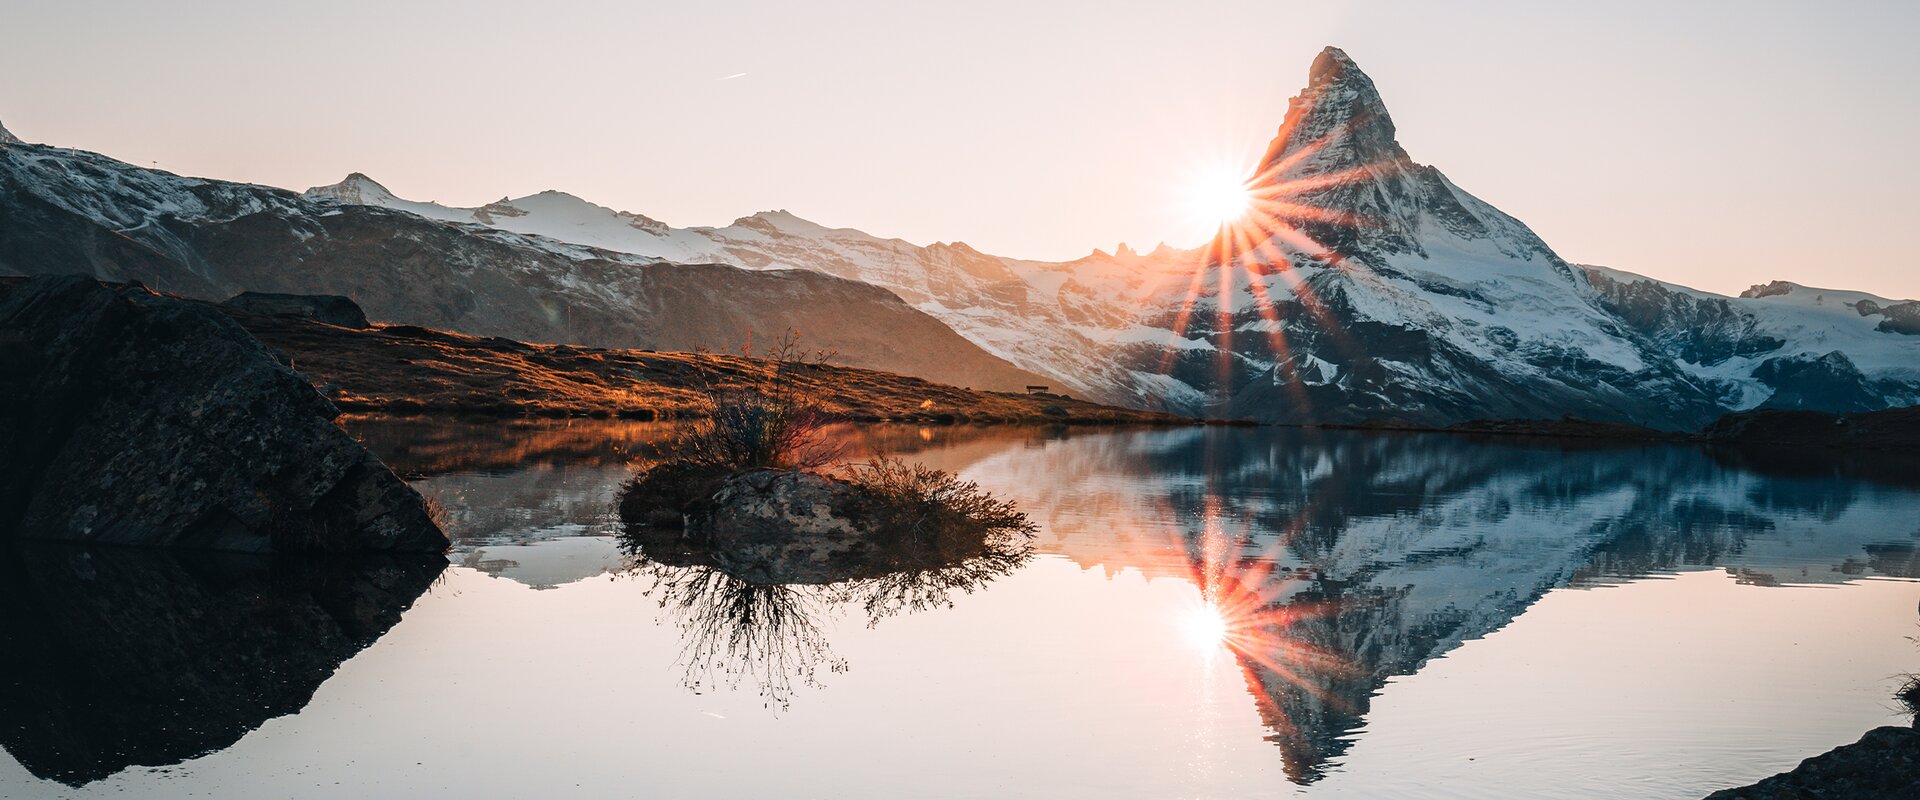 In autumnal mood, the Matterhorn is reflected in lake Stellisee at sunset.  | © Gabriel Perren